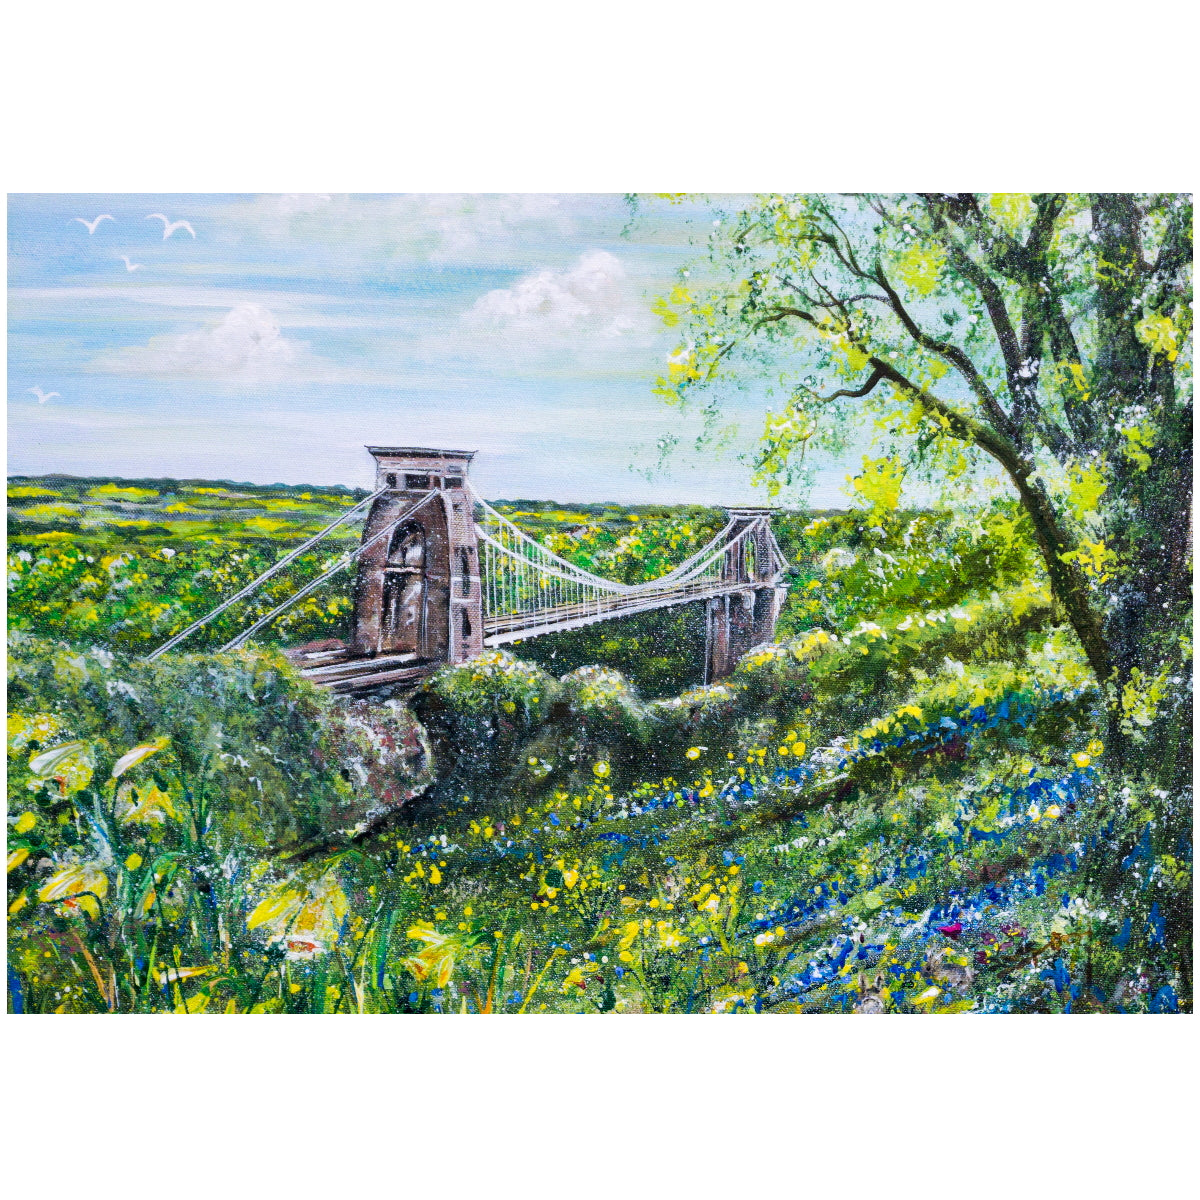 Clifton Suspension Bridge and Daffodils - A5 - A1 Giclée Print by Lynette Bower